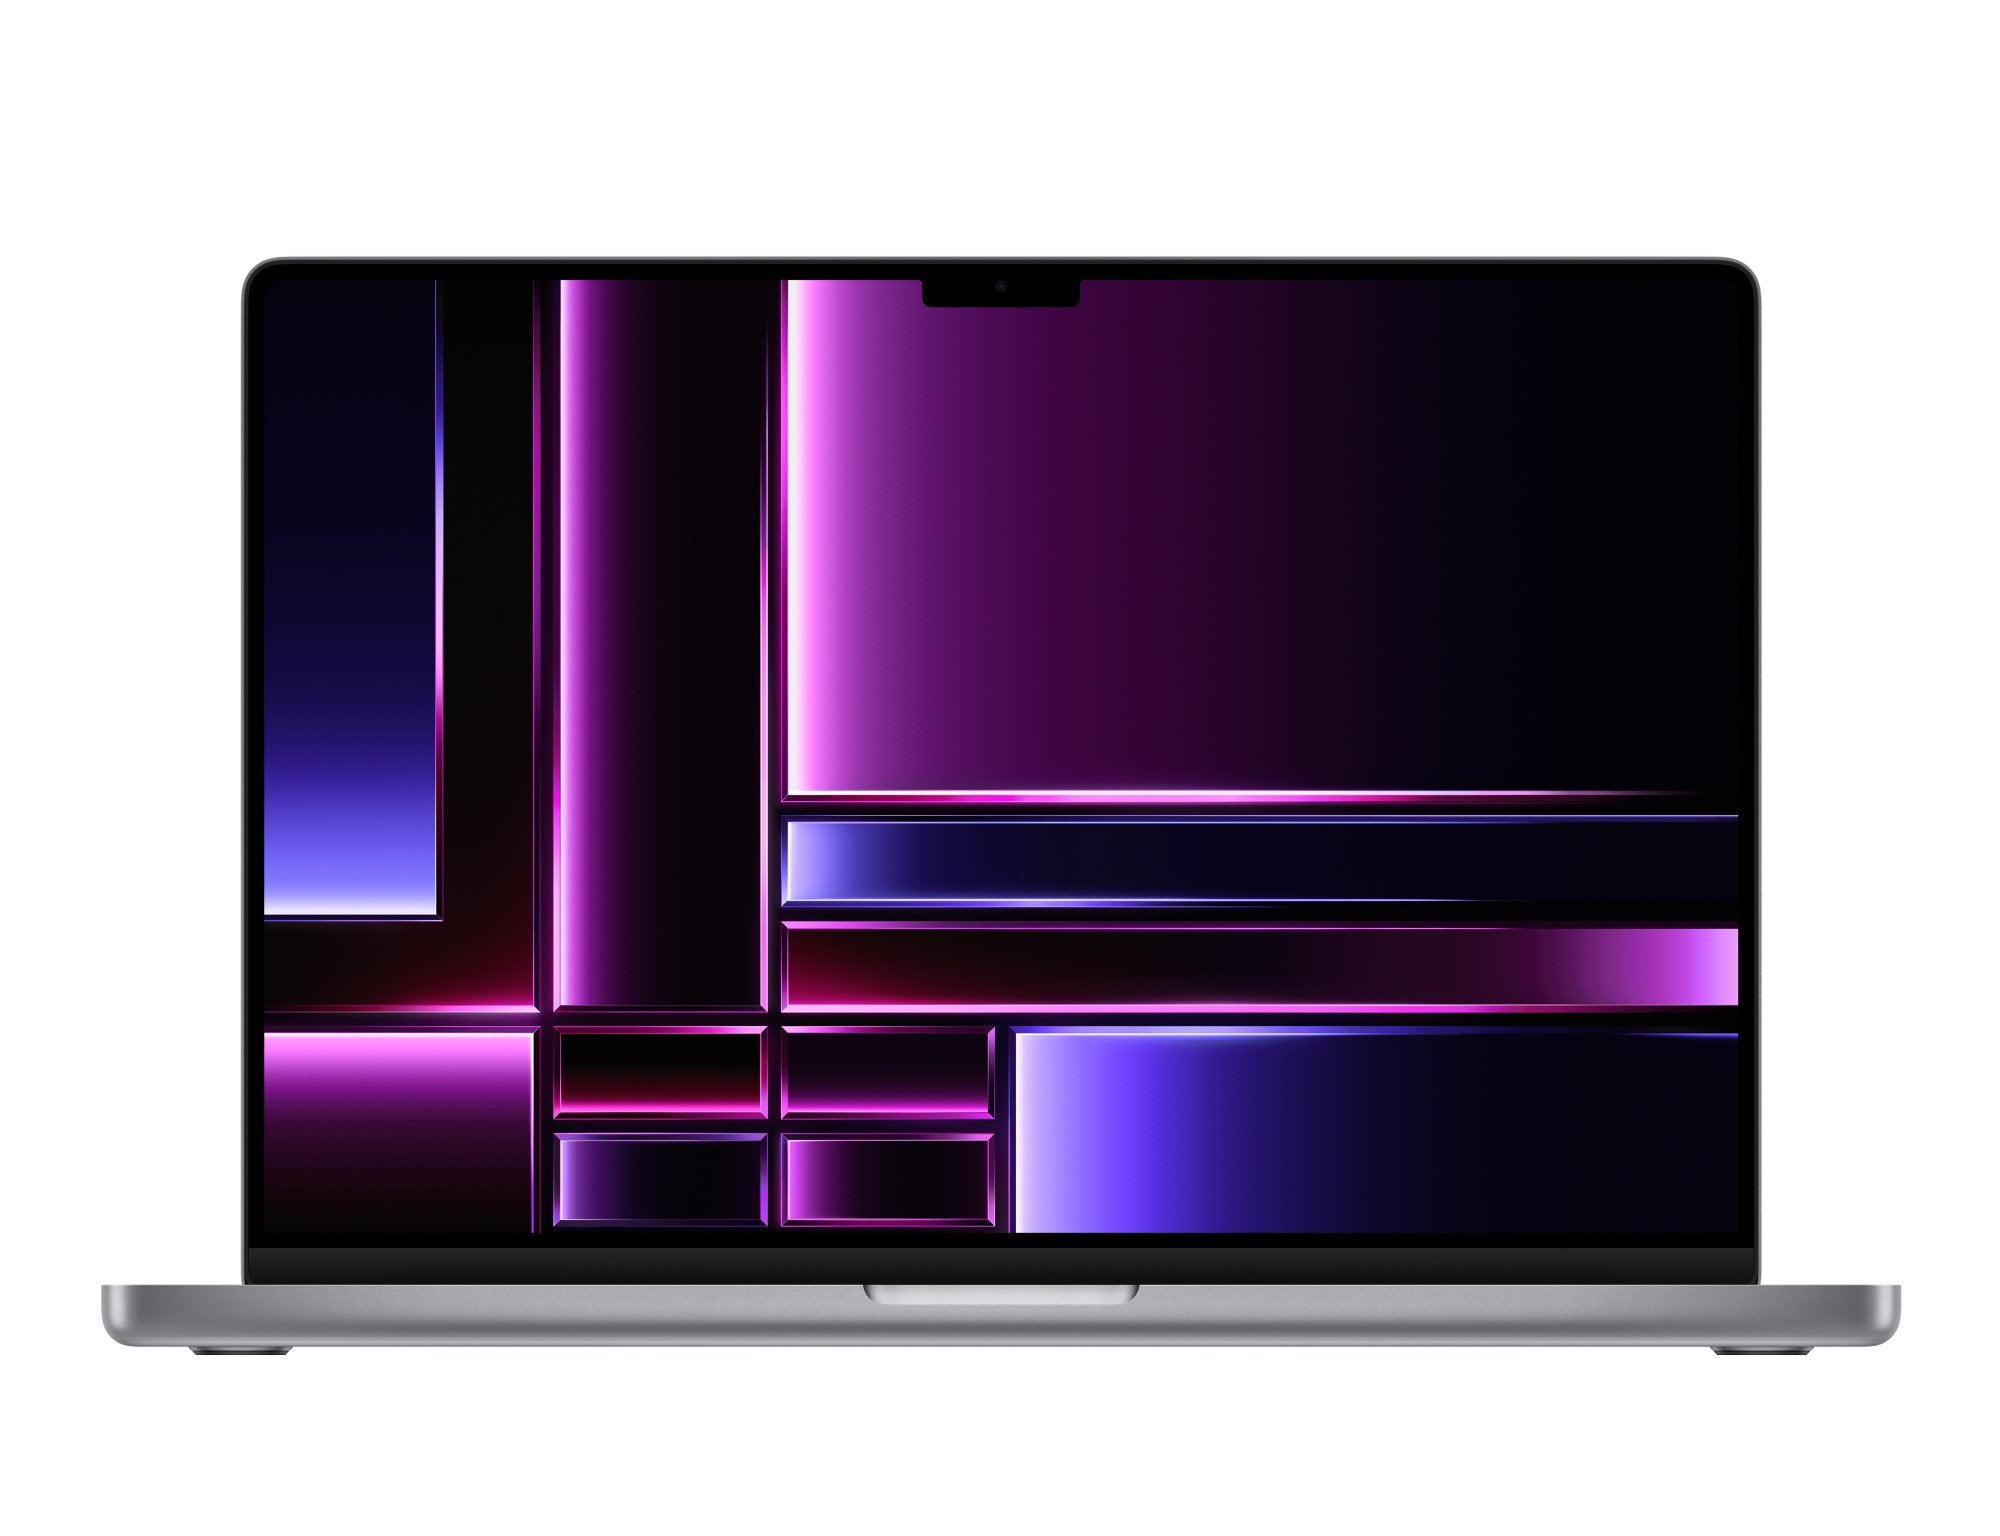 MNW83AB/A / 16-inch MacBook Pro: Apple M2 Pro chip with 12?core CPU and 19?core GPU, 512GB SSD - Spa 512 GB / Space grey / M2 Chip